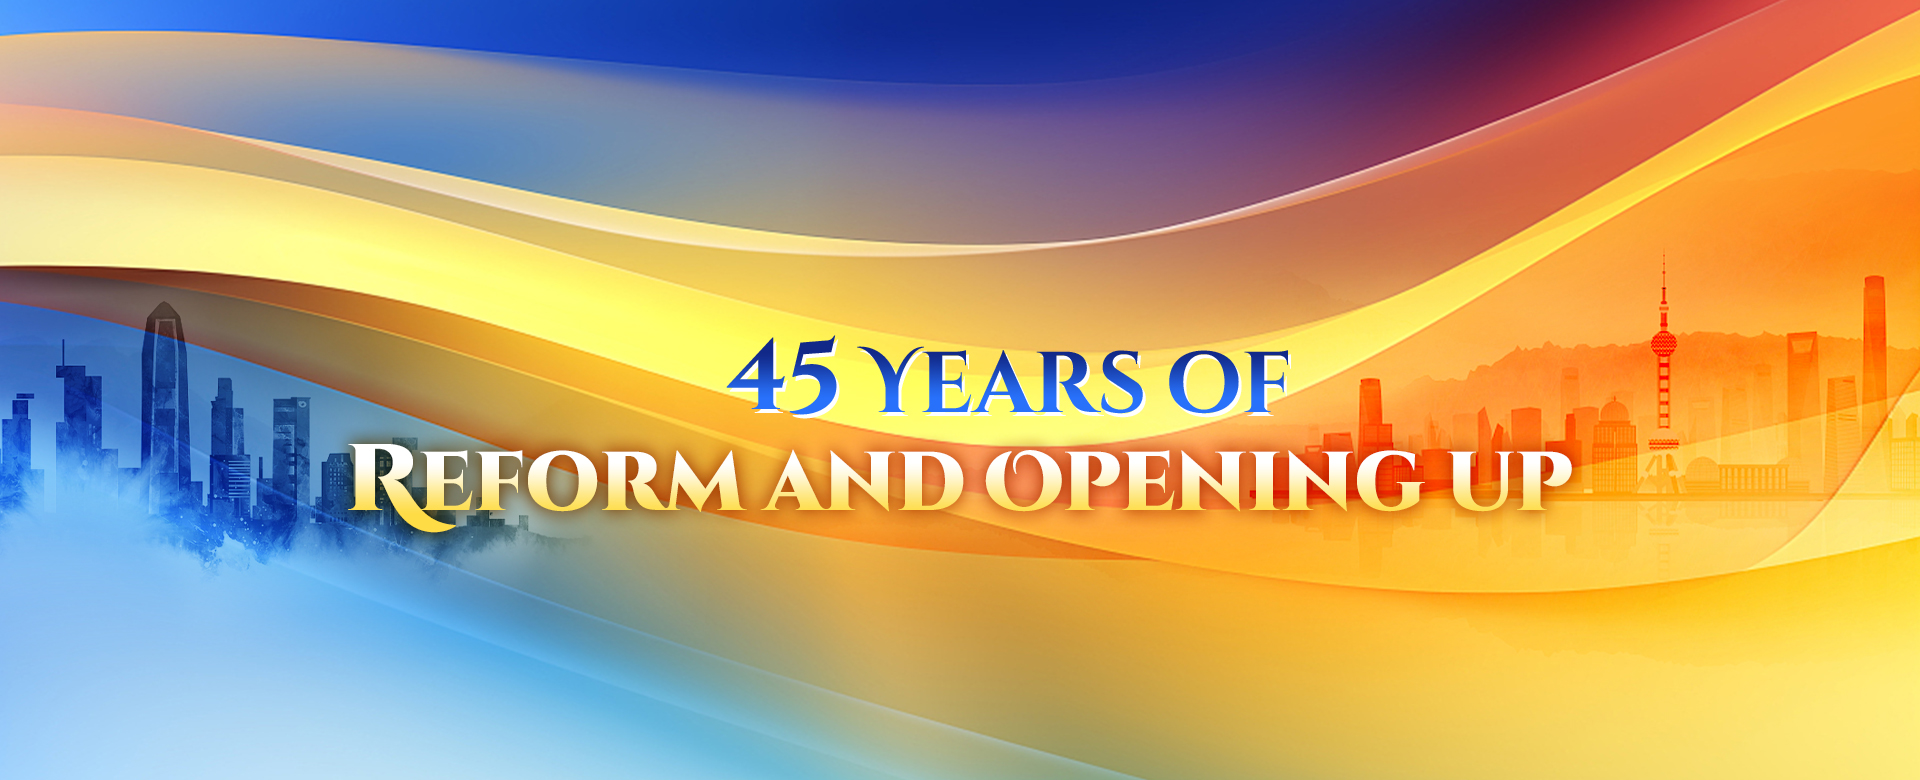 web banner for the report of 45 years of reform and opening up